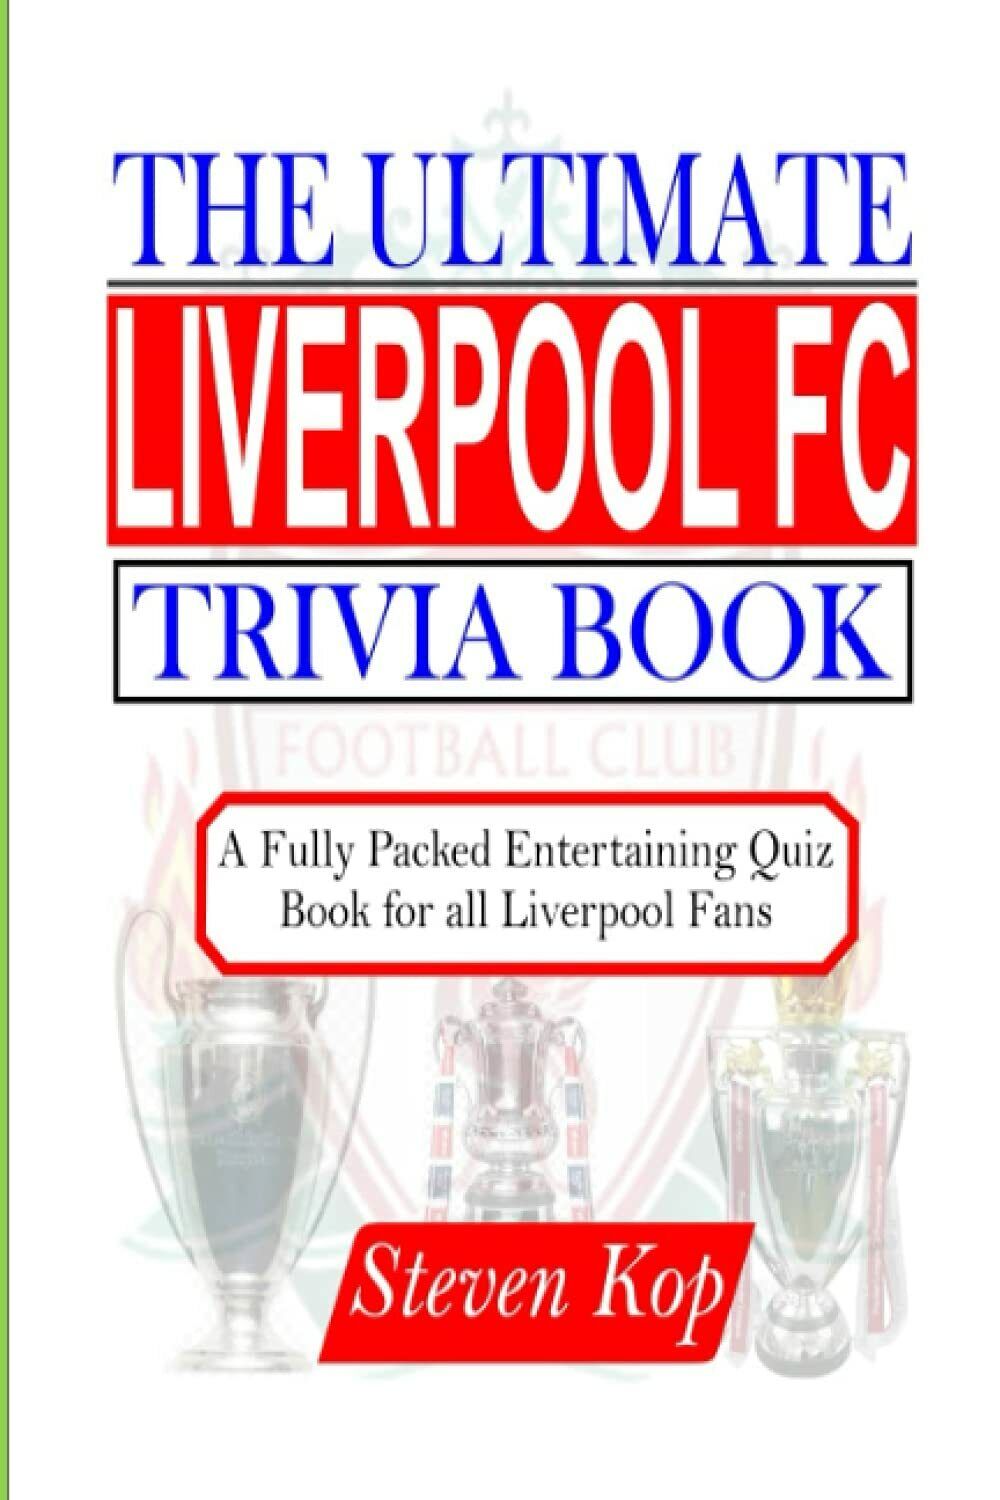 THE ULTIMATE LIVERPOOL FC TRIVIA BOOK - Kop - Independently Published, 2021 libro usato